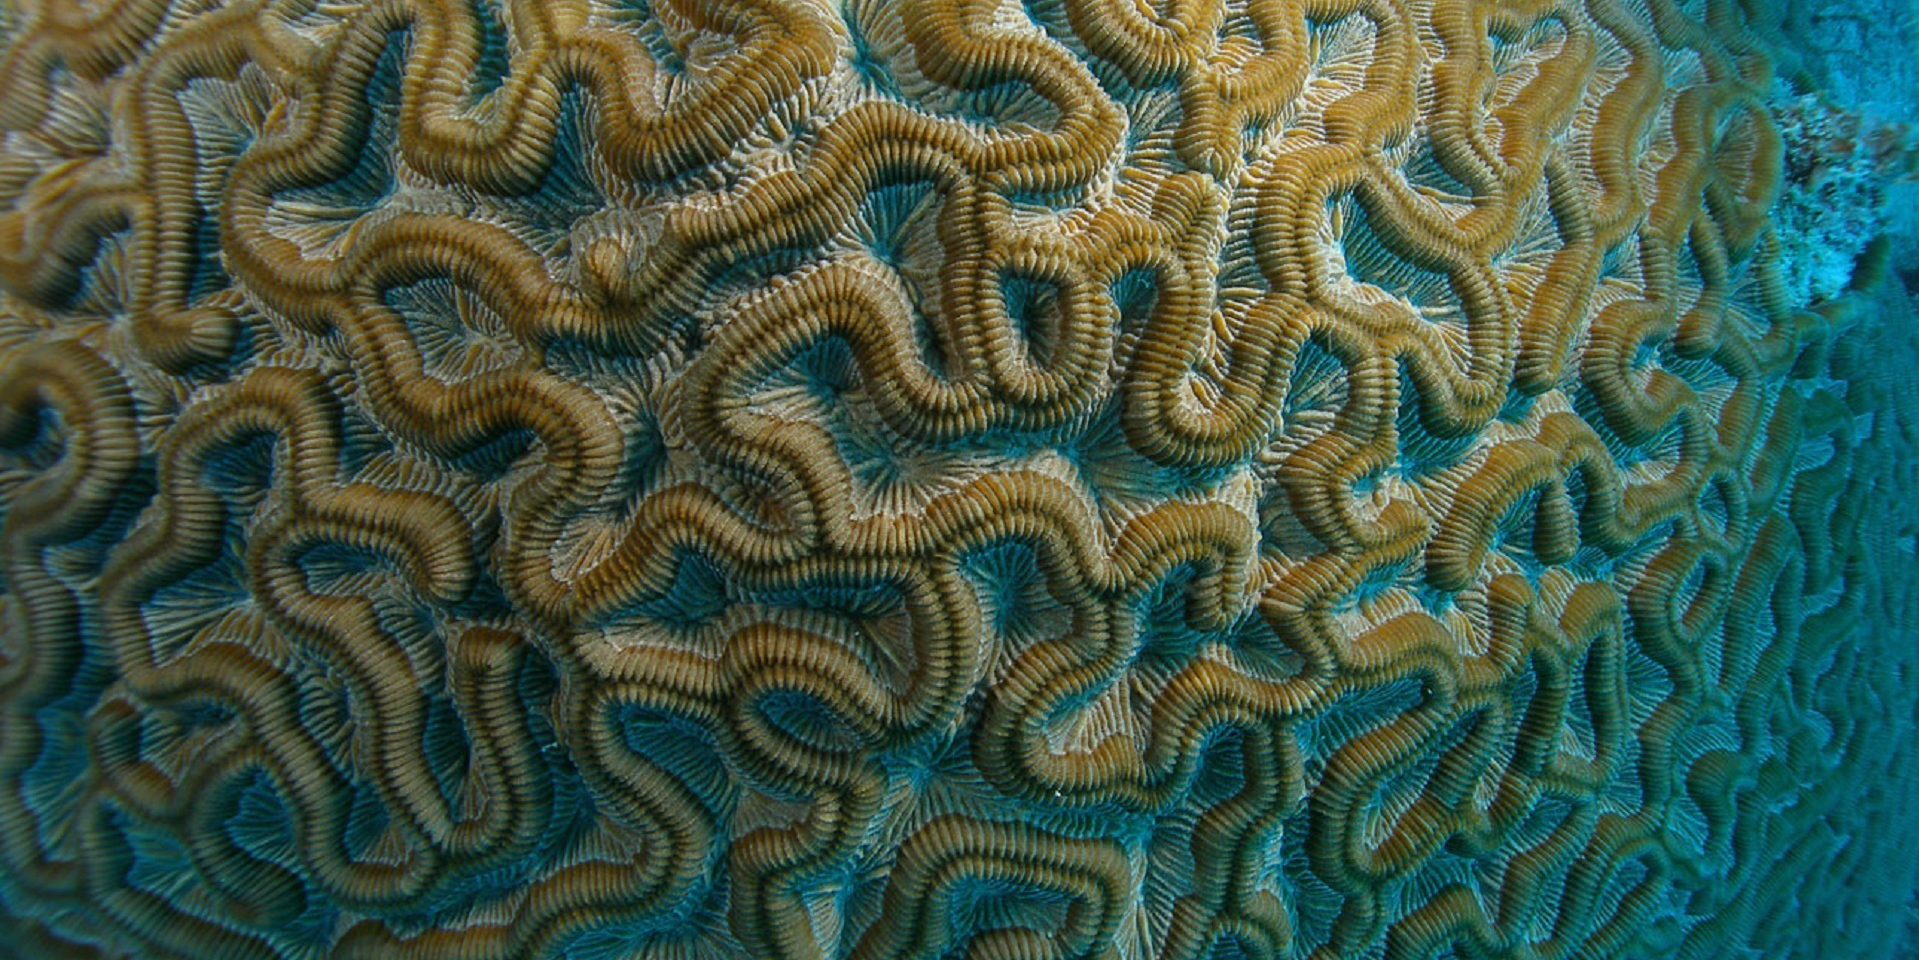 This brain coral is one of the species found off of Mexico in the Carribean Sea. GVI participants collect data on the fish and coral species in the region.